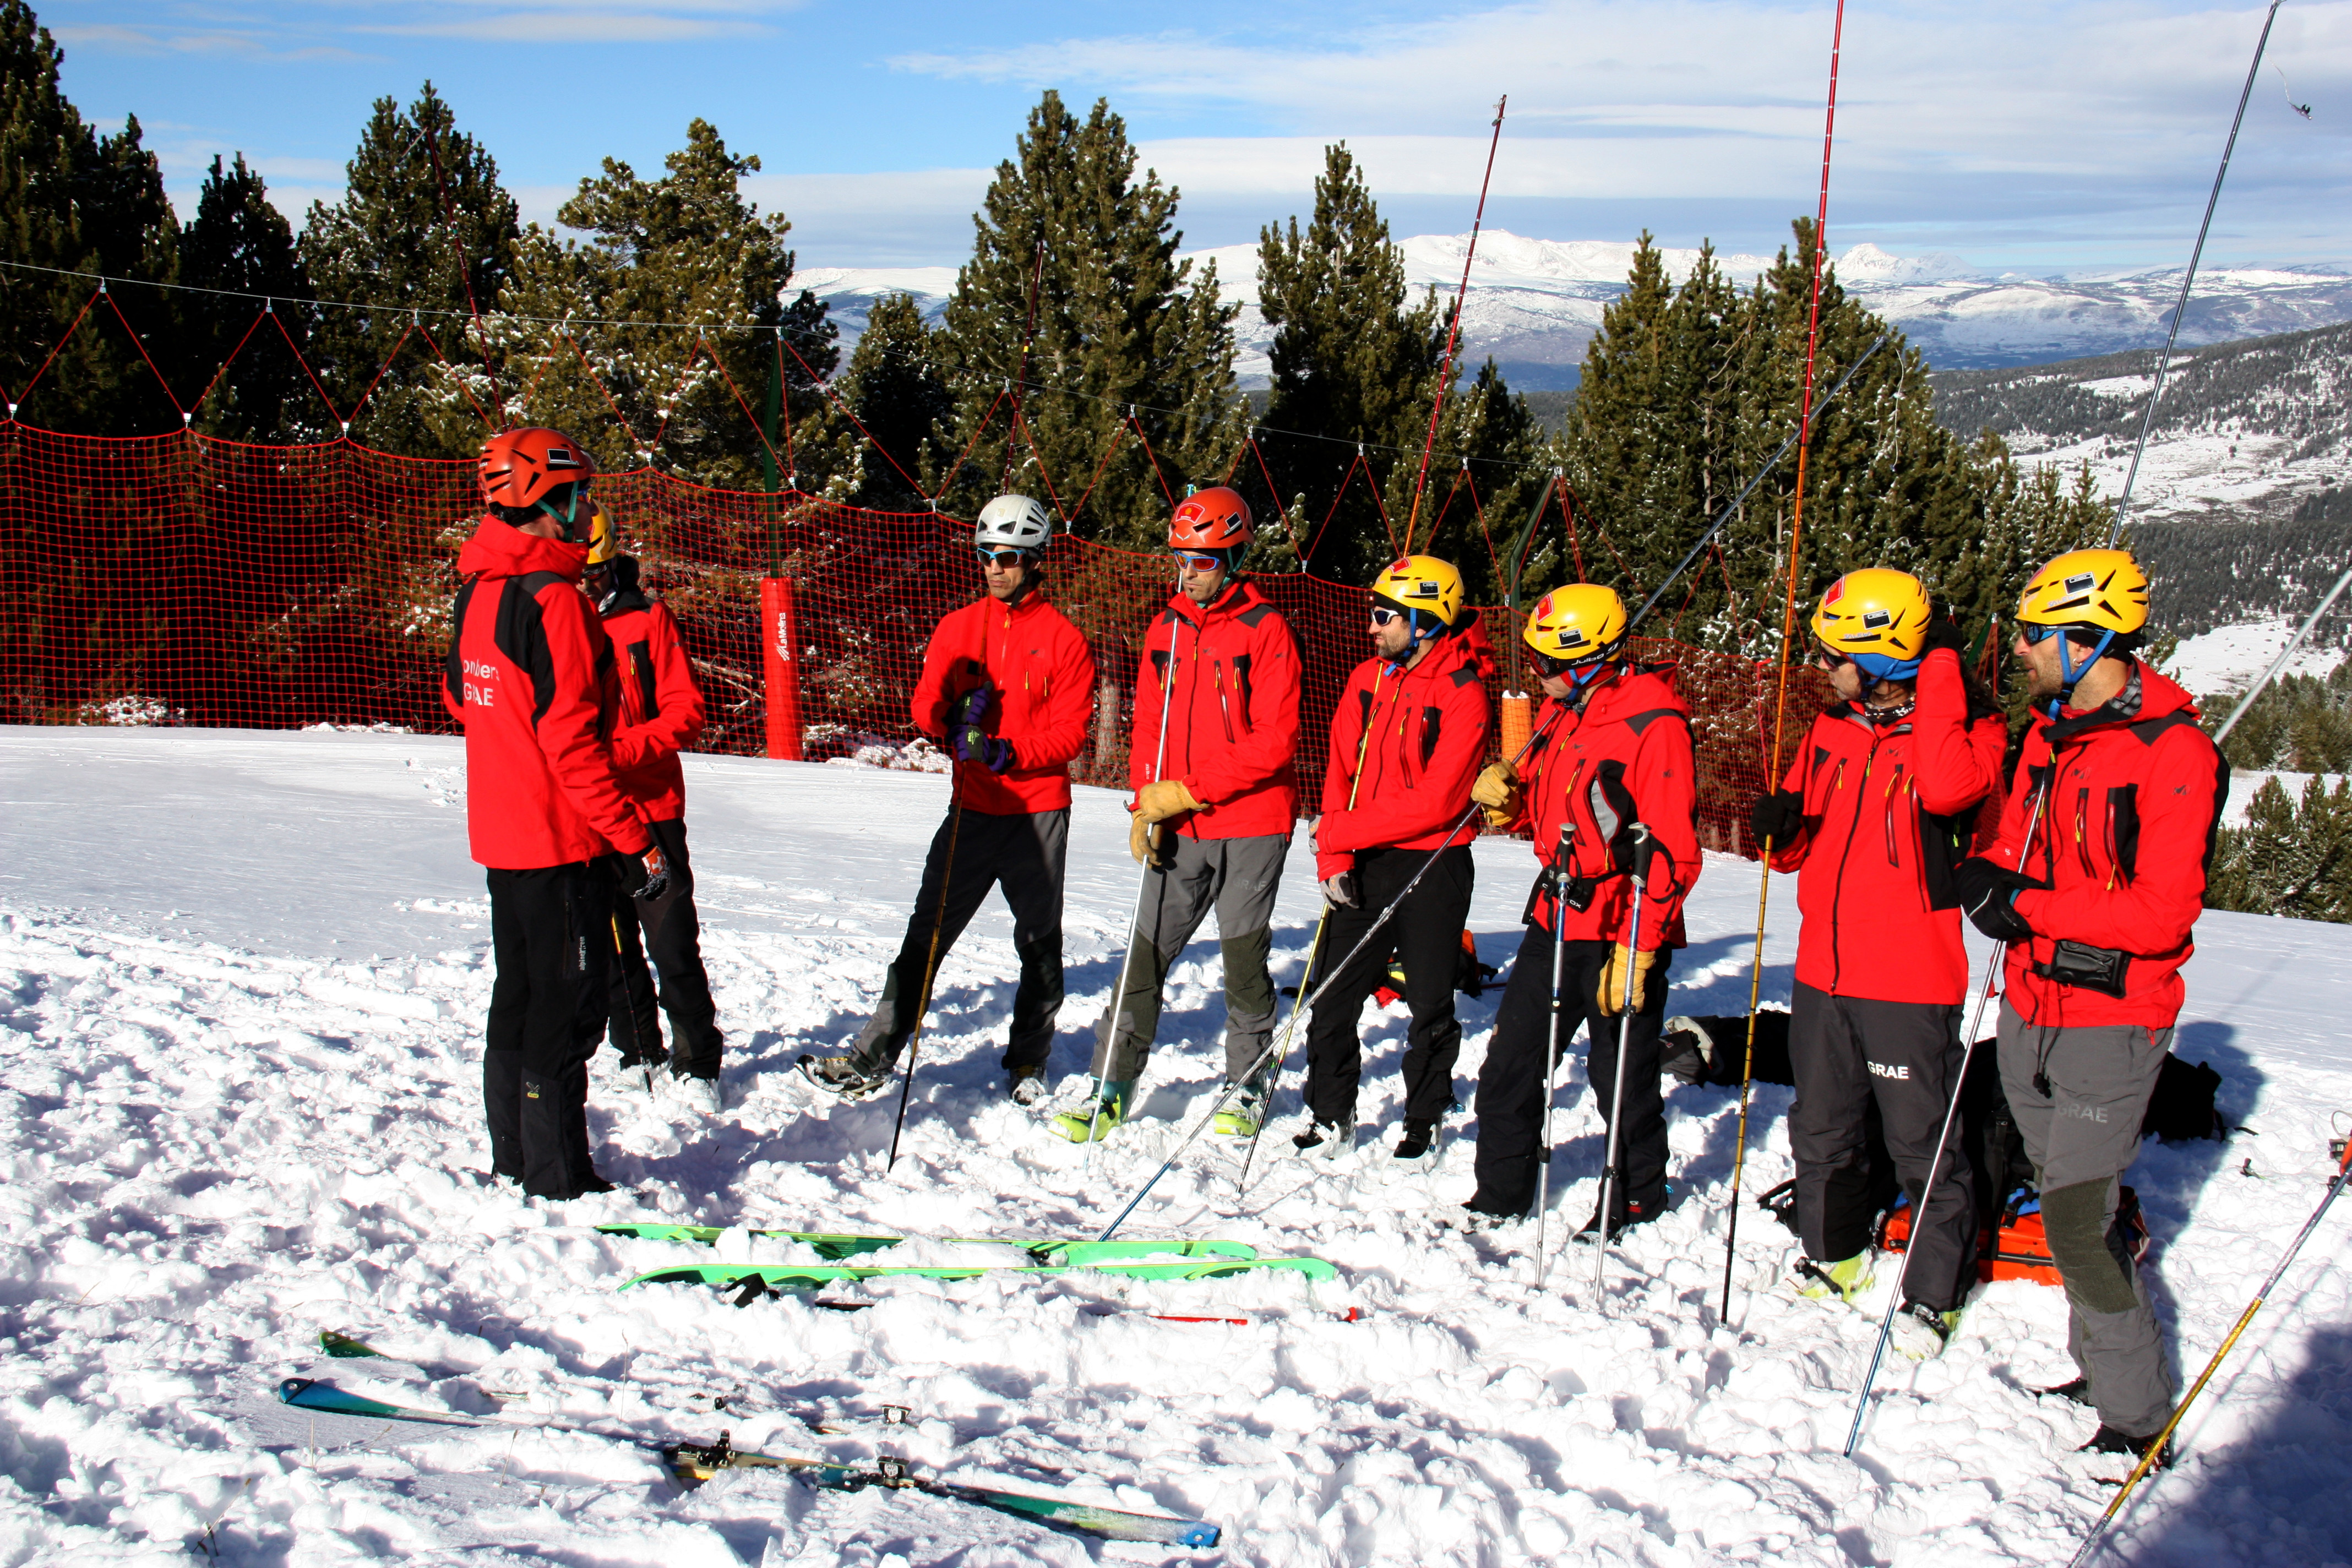 Firefighters getting ready to train for avalanche rescue (by ACN)